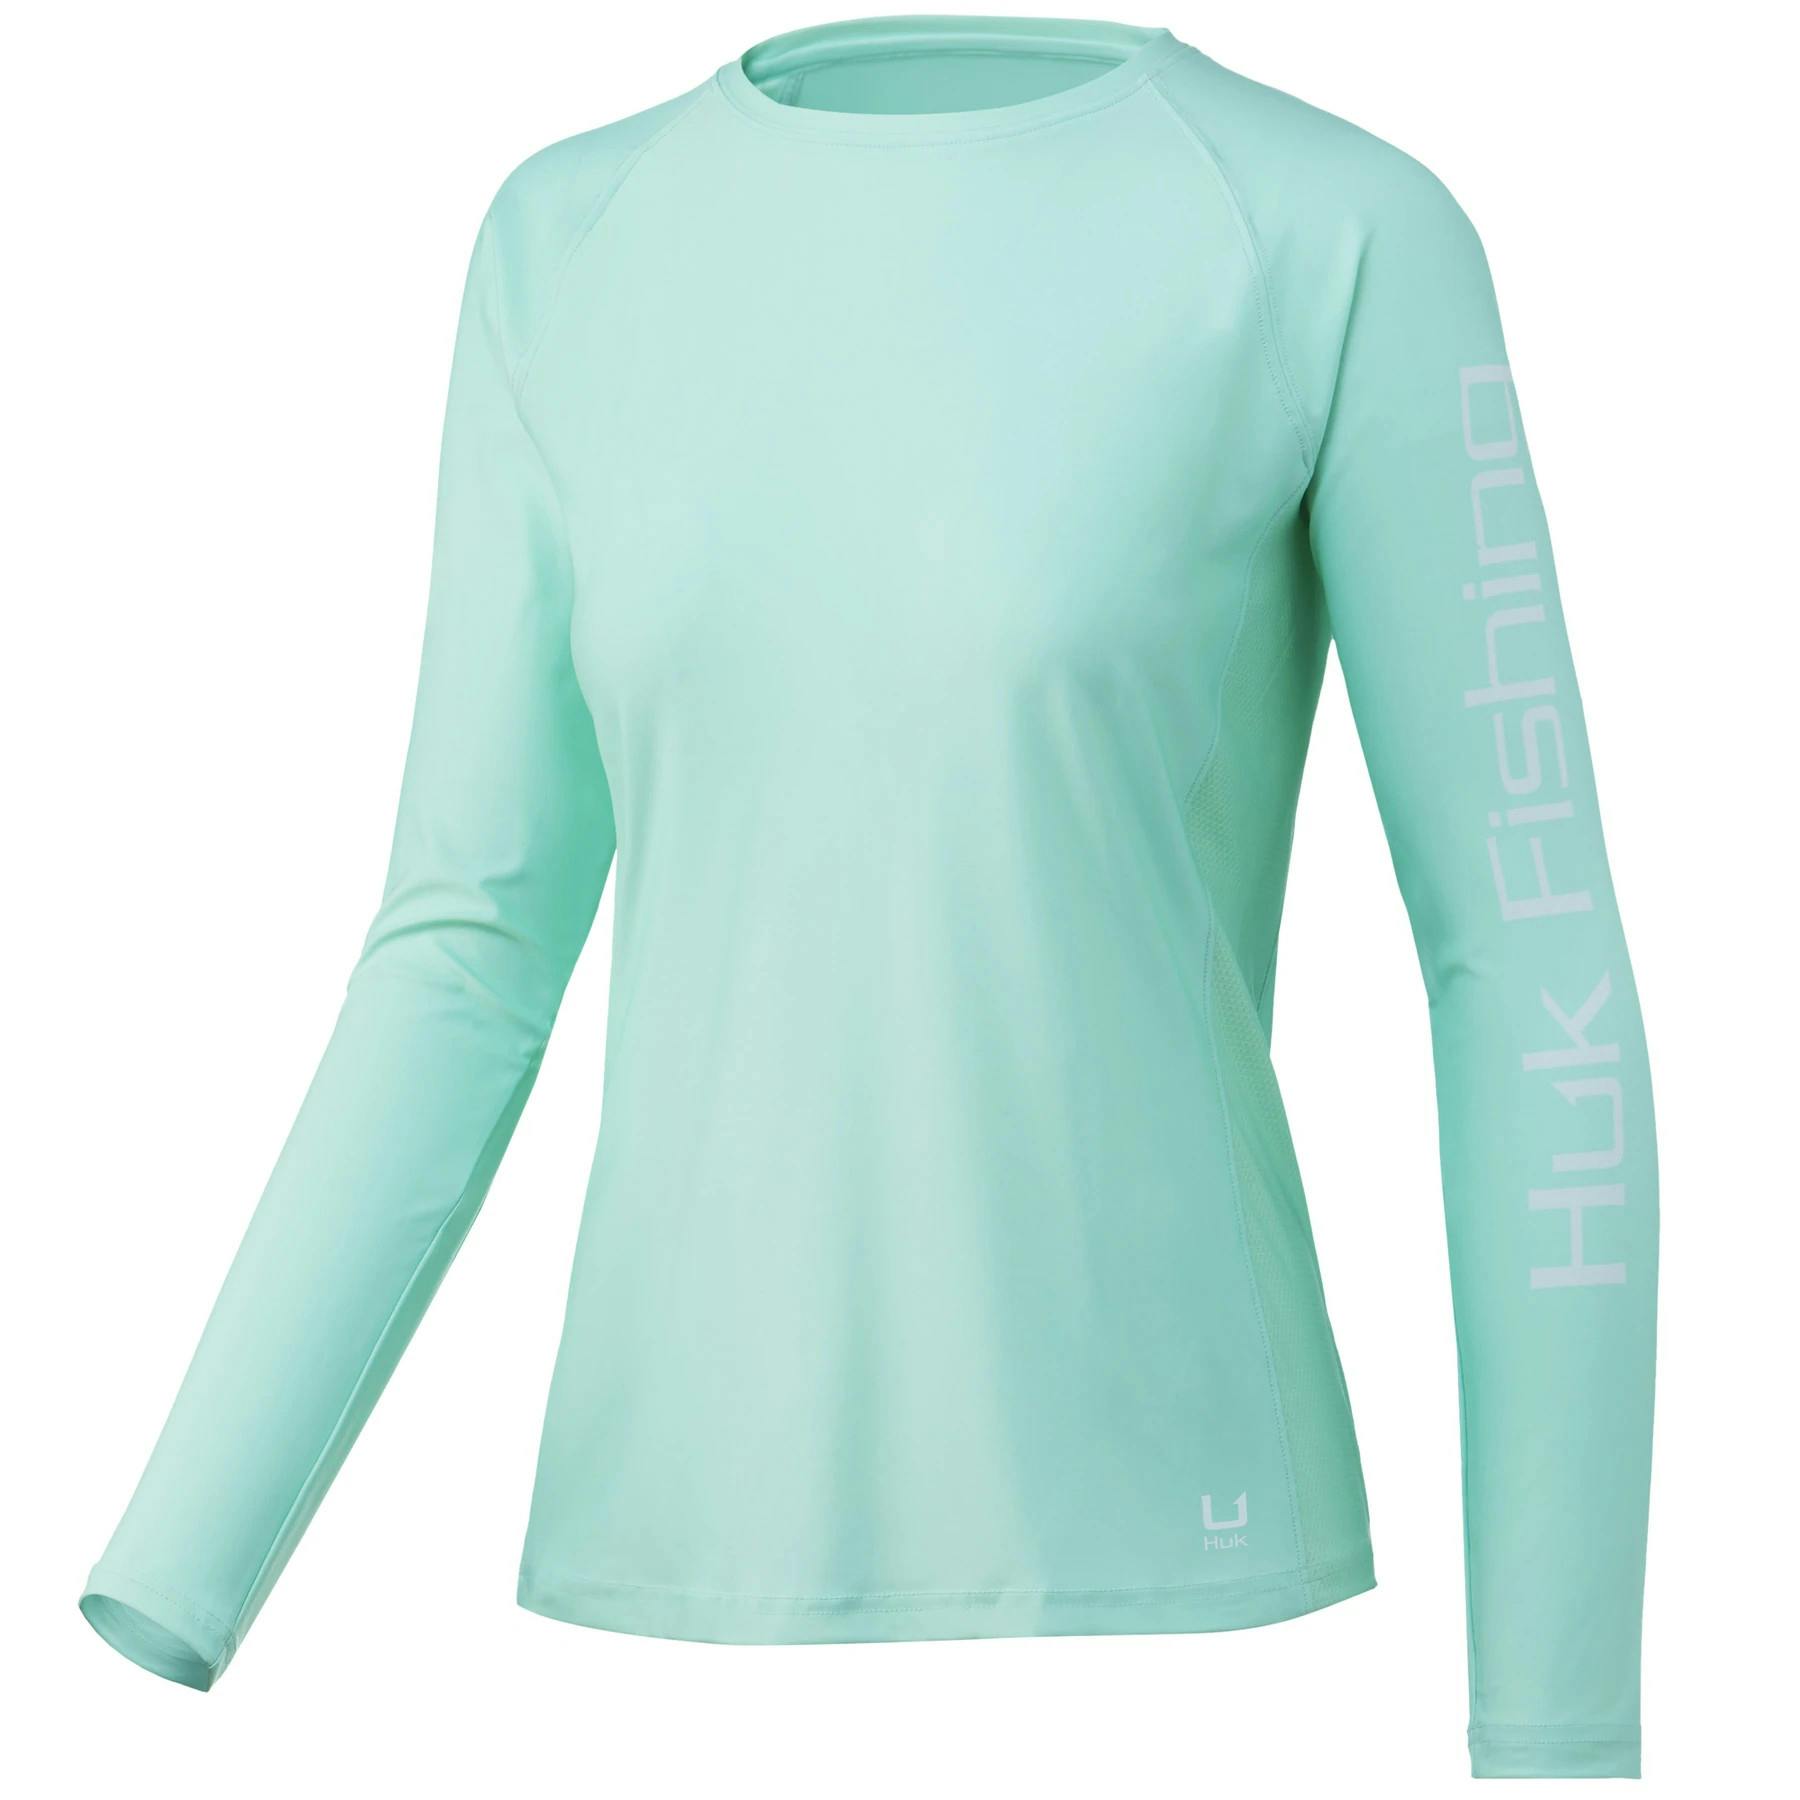 Huk Scaled Logo Pursuit Performance Long Sleeve Shirt Front - Beach Glass